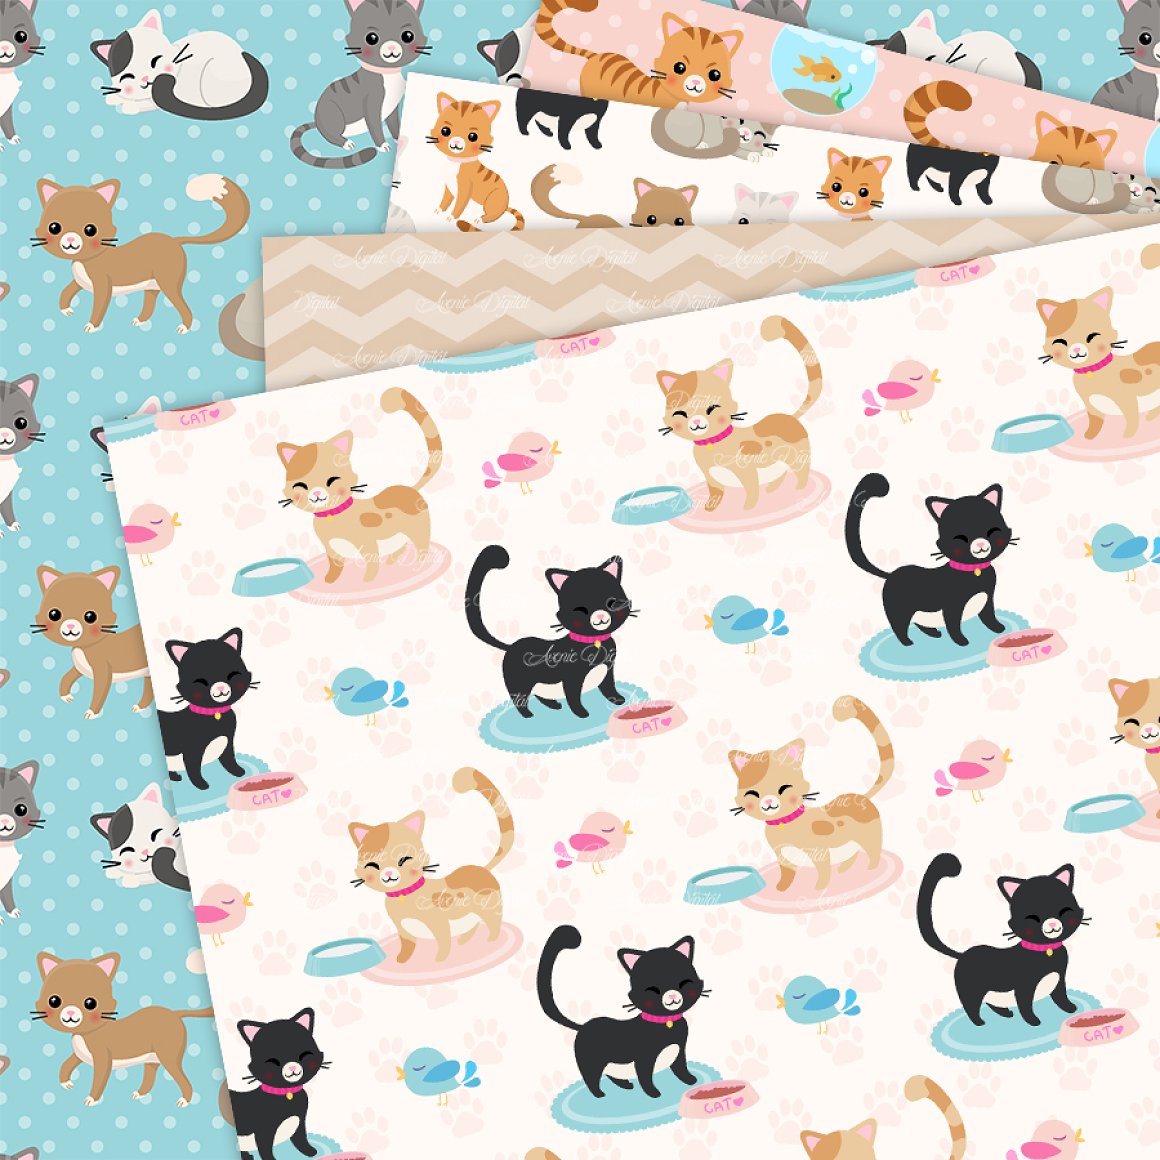 Pastel cats for your cute project.